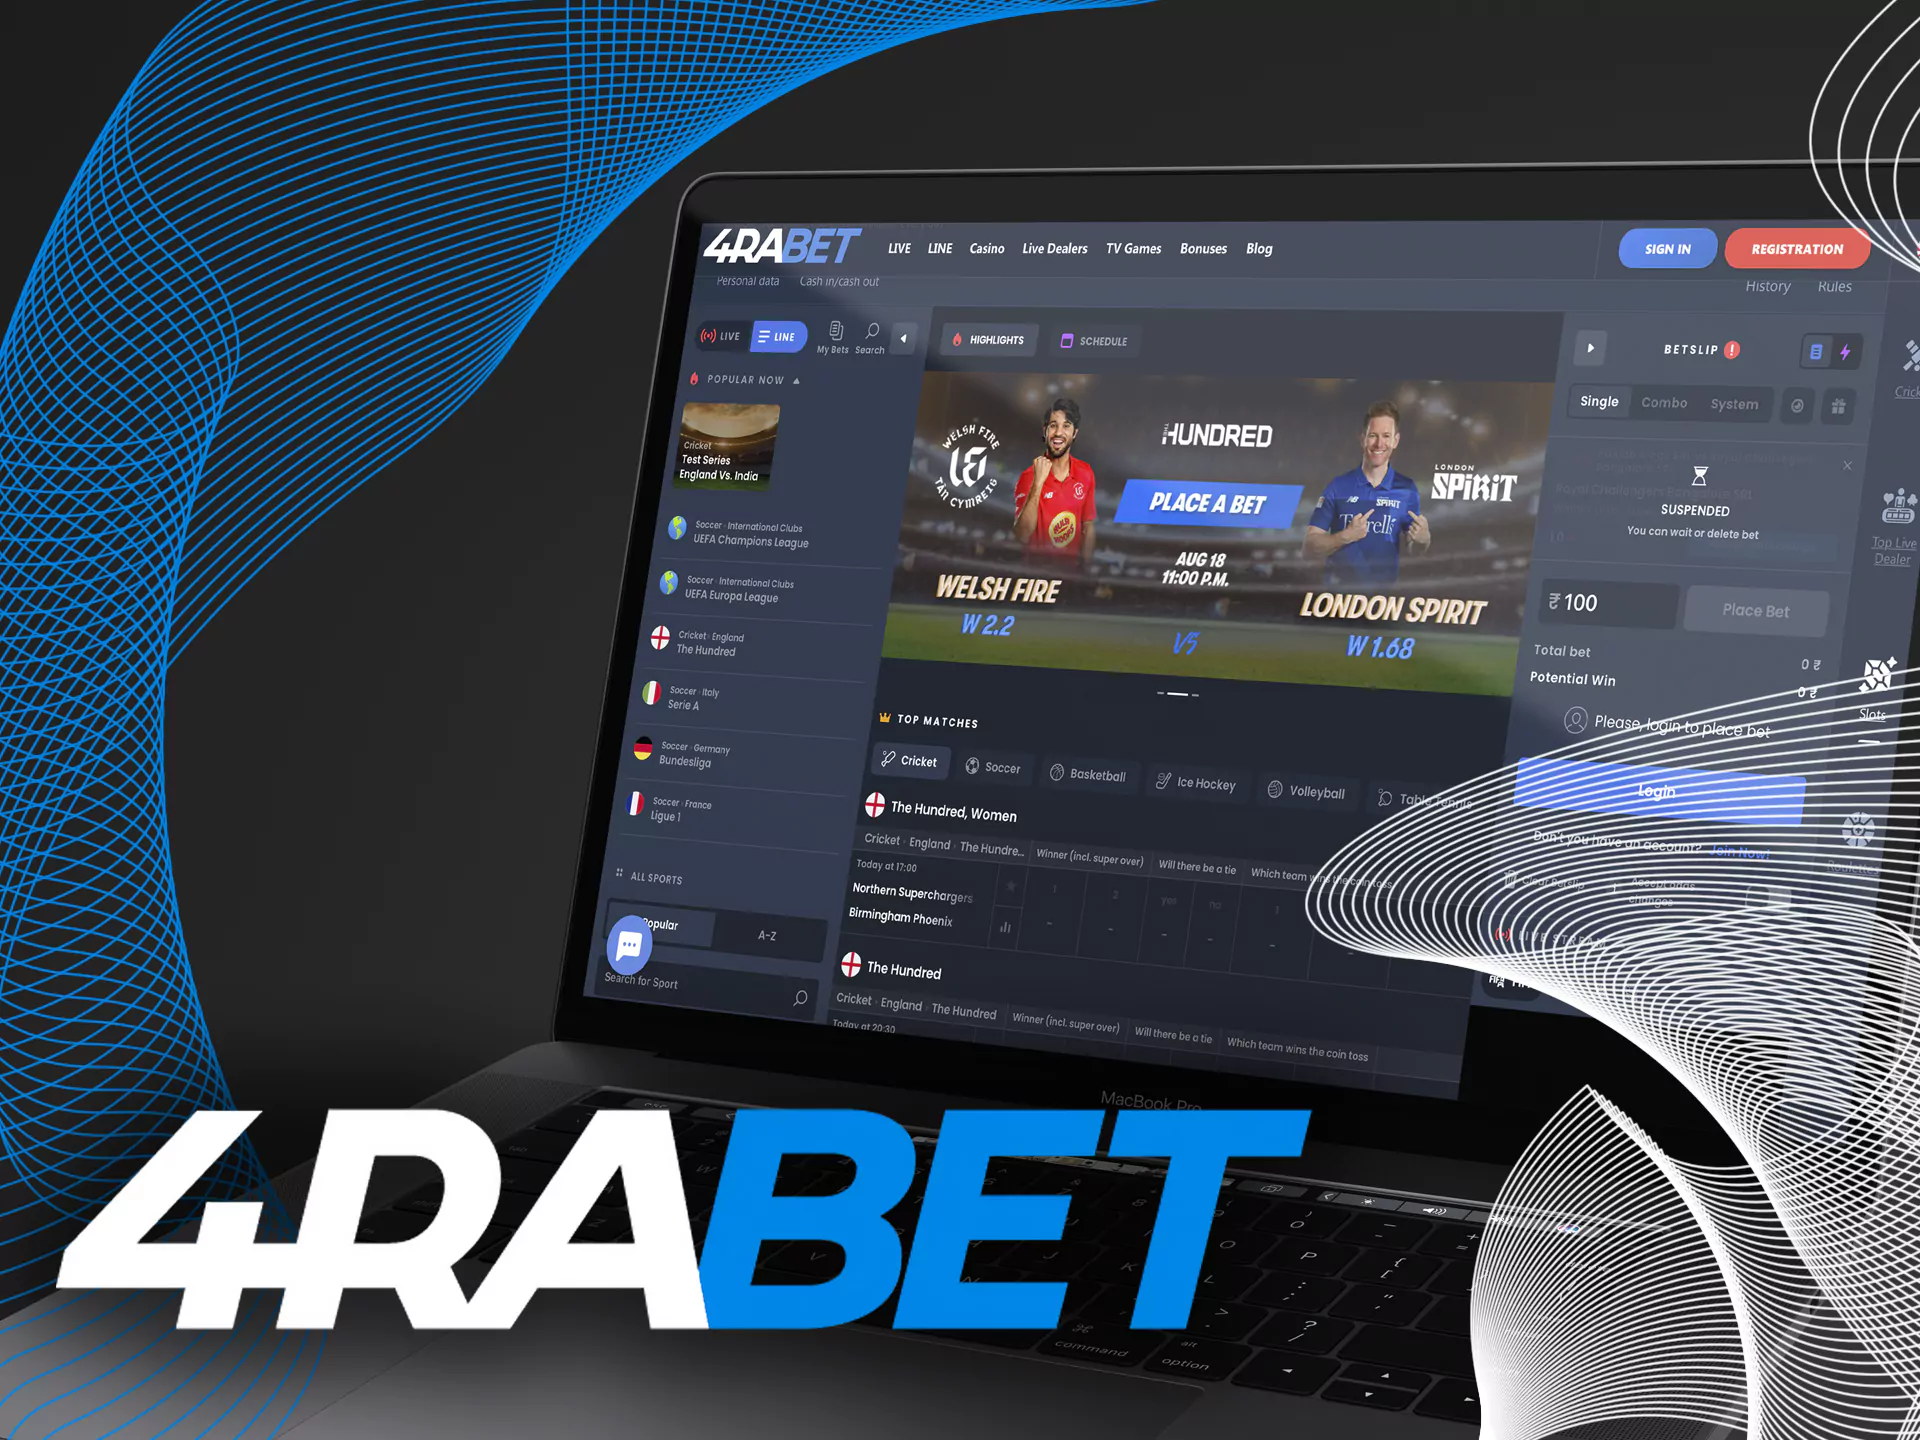 You can bet at Dafabet on your personal computer.